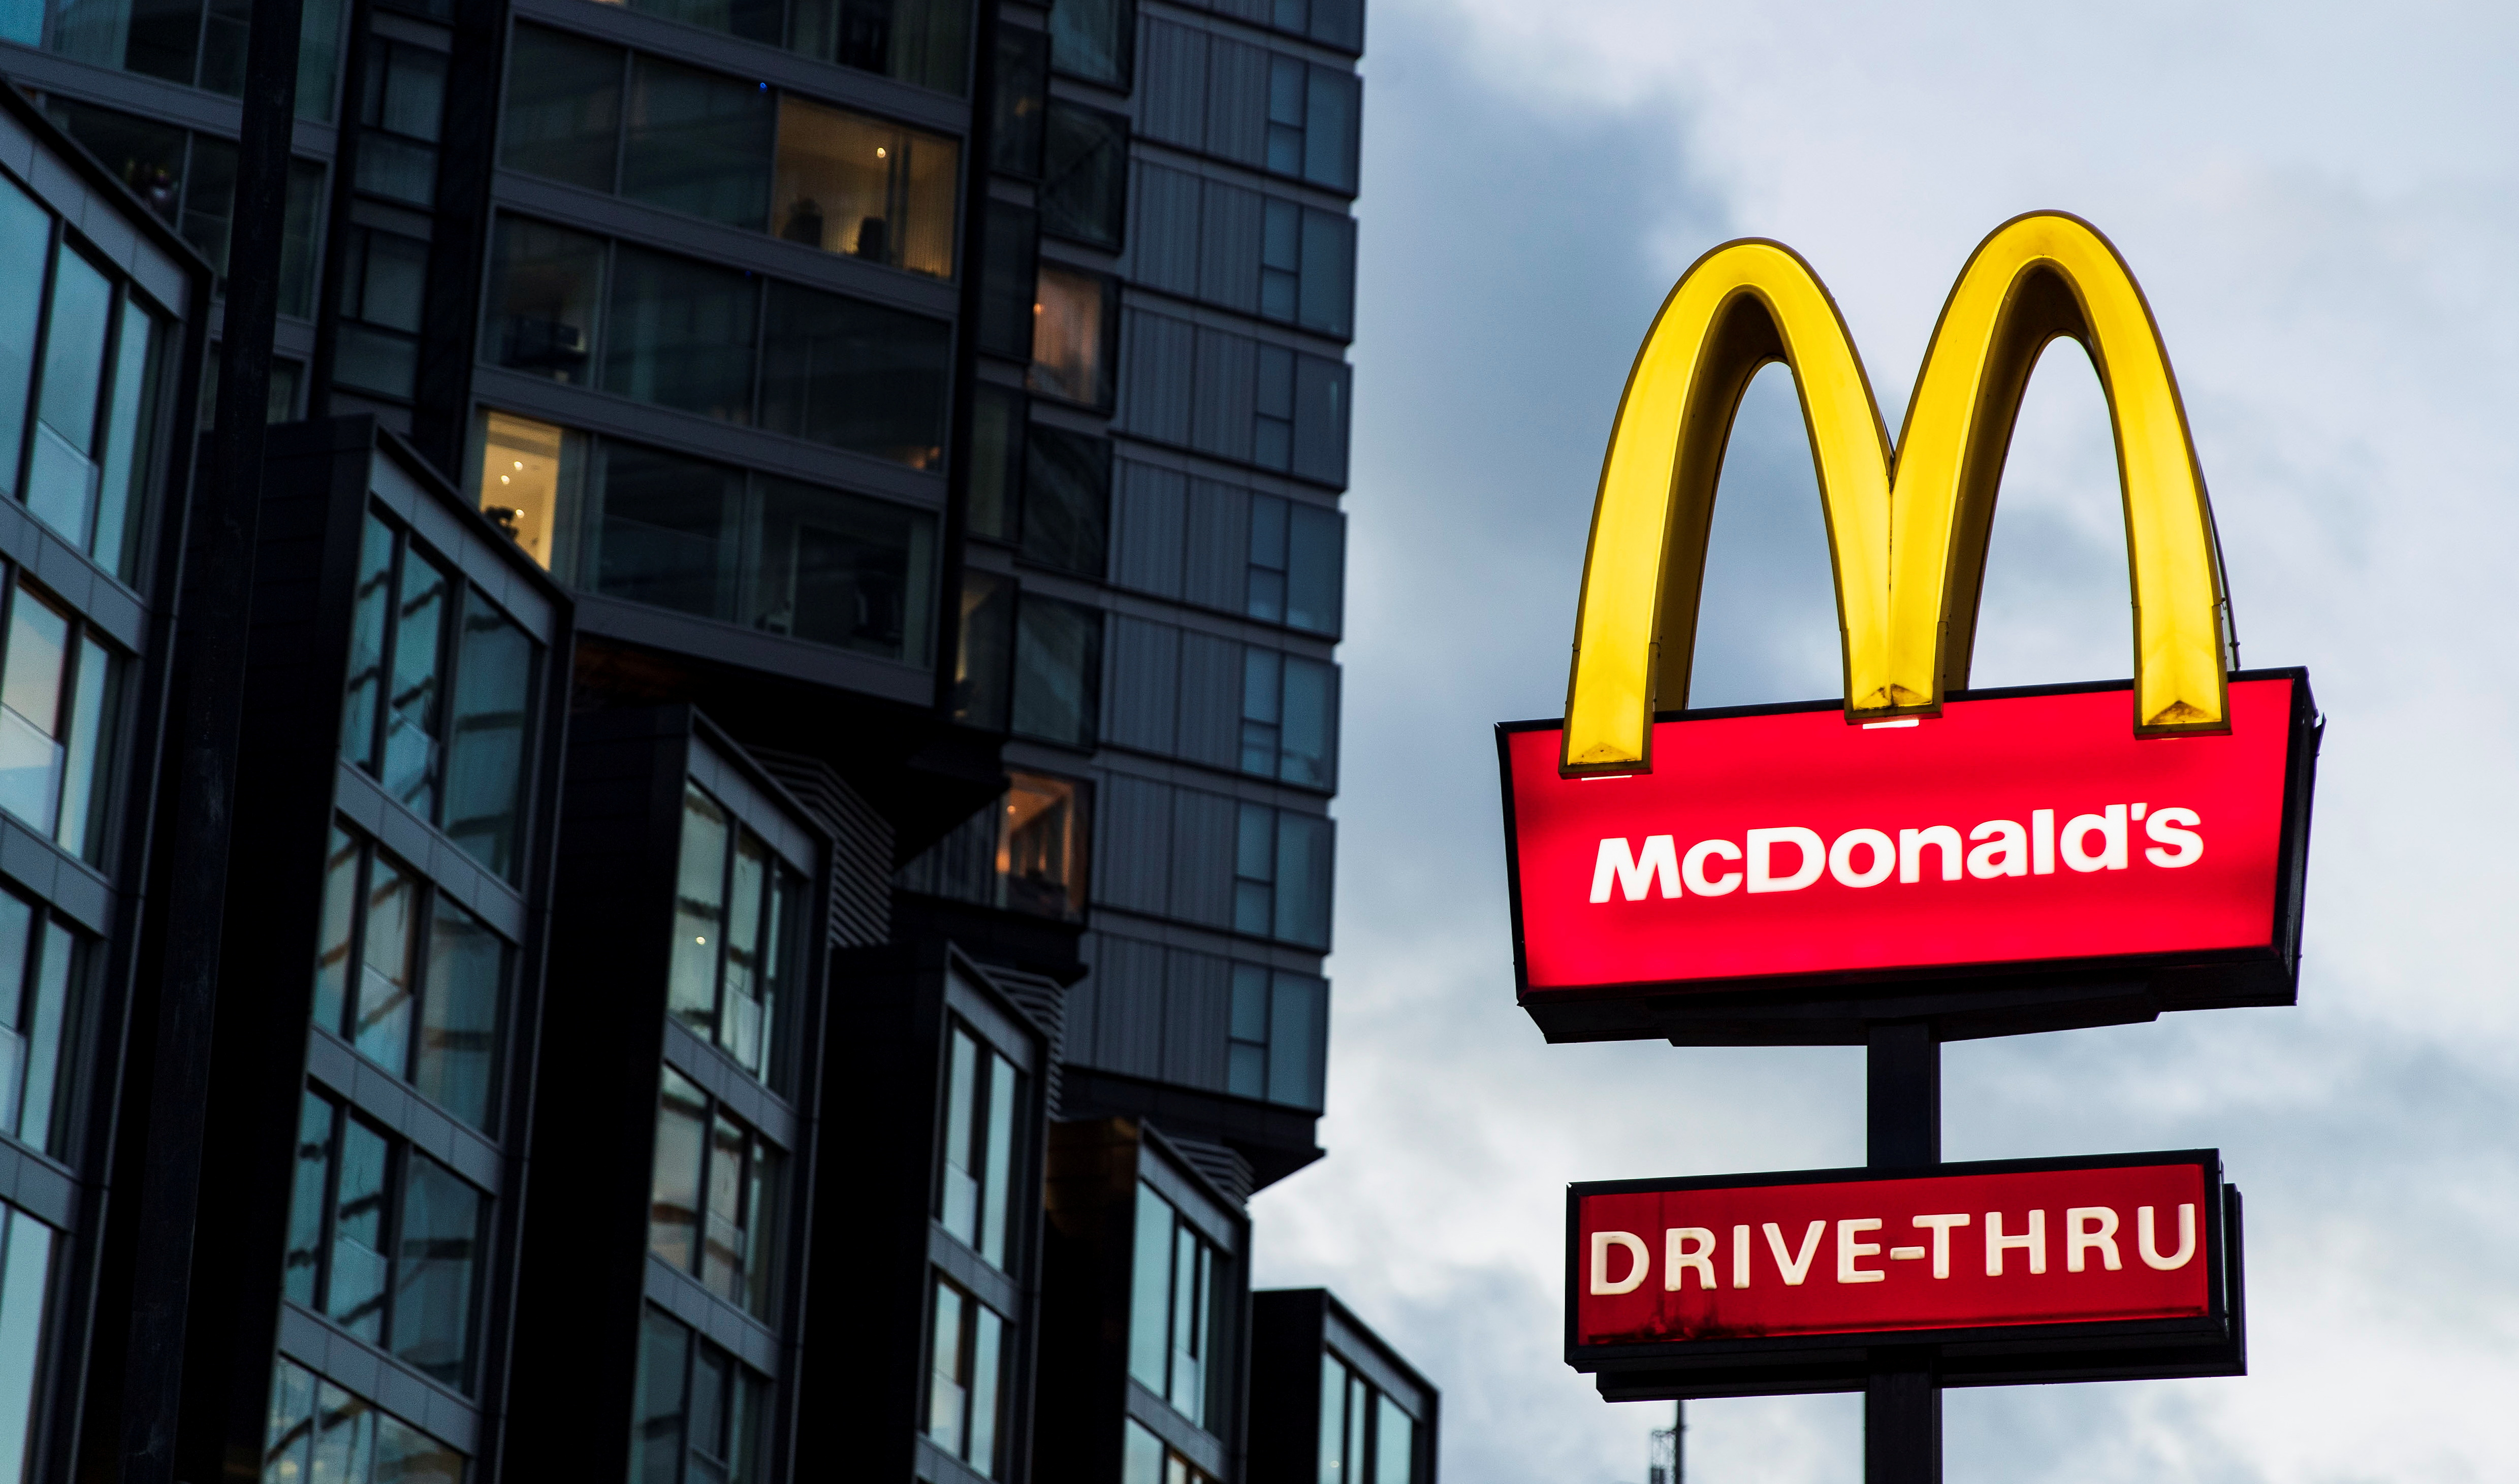 A view of a sign outside a McDonald's drive-thru restaurant in London